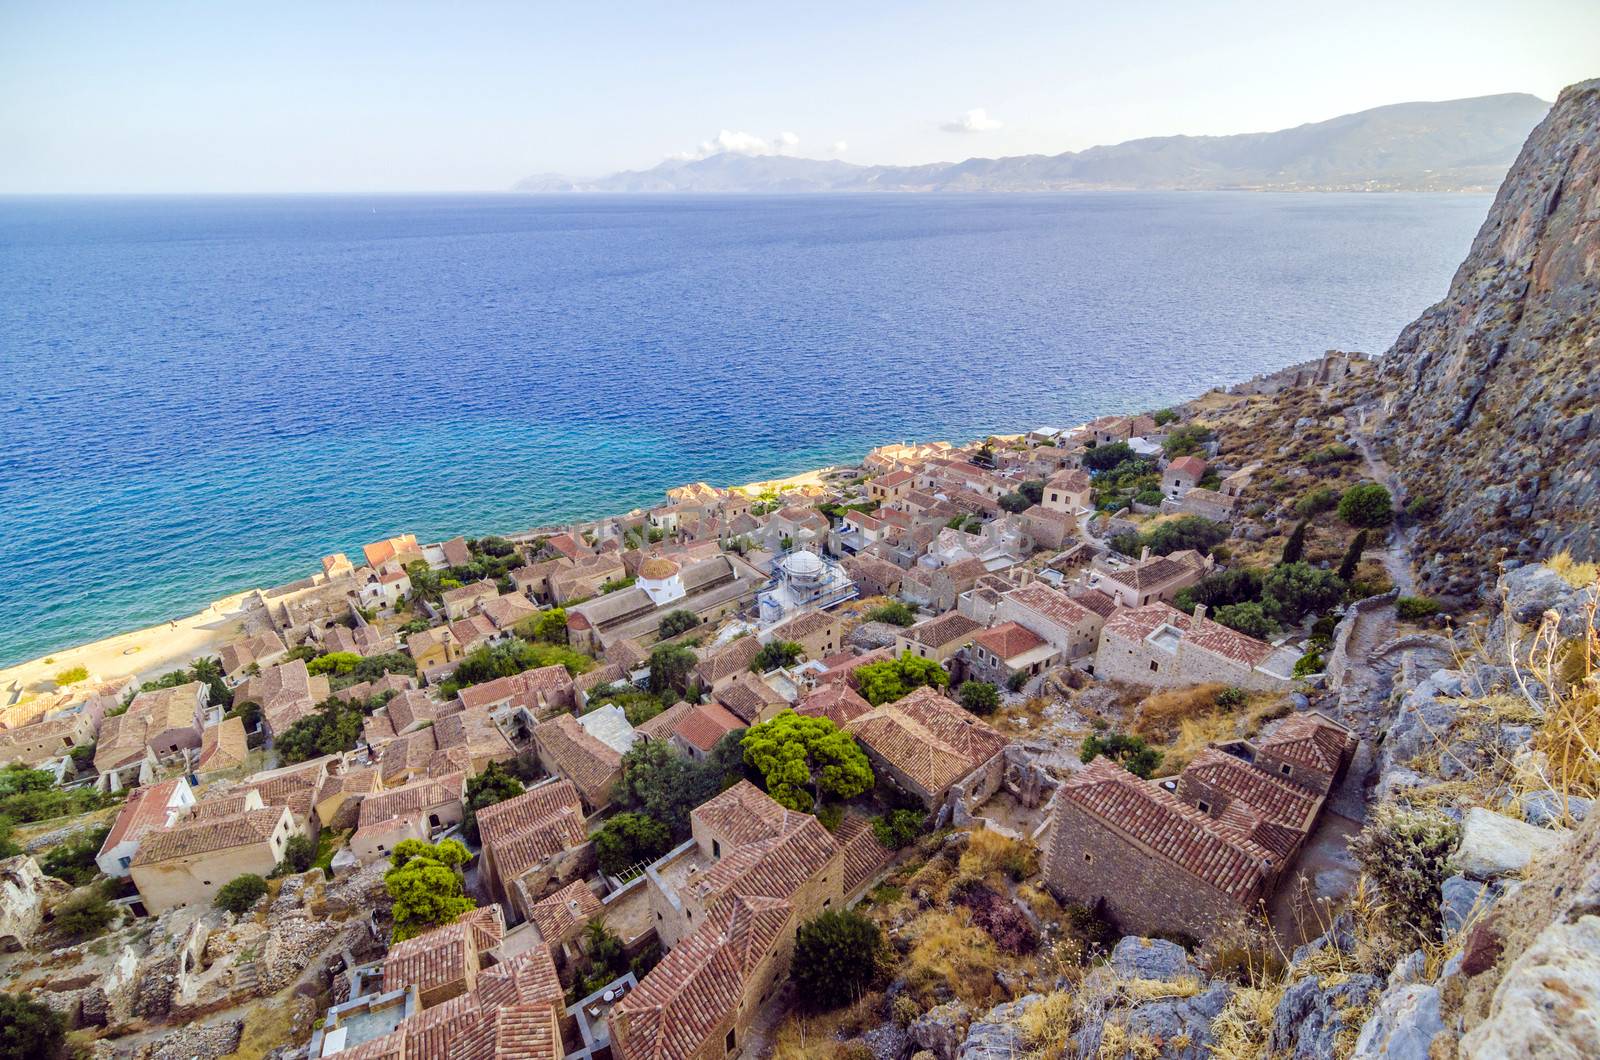 Monemvasia from above by Anzemulec